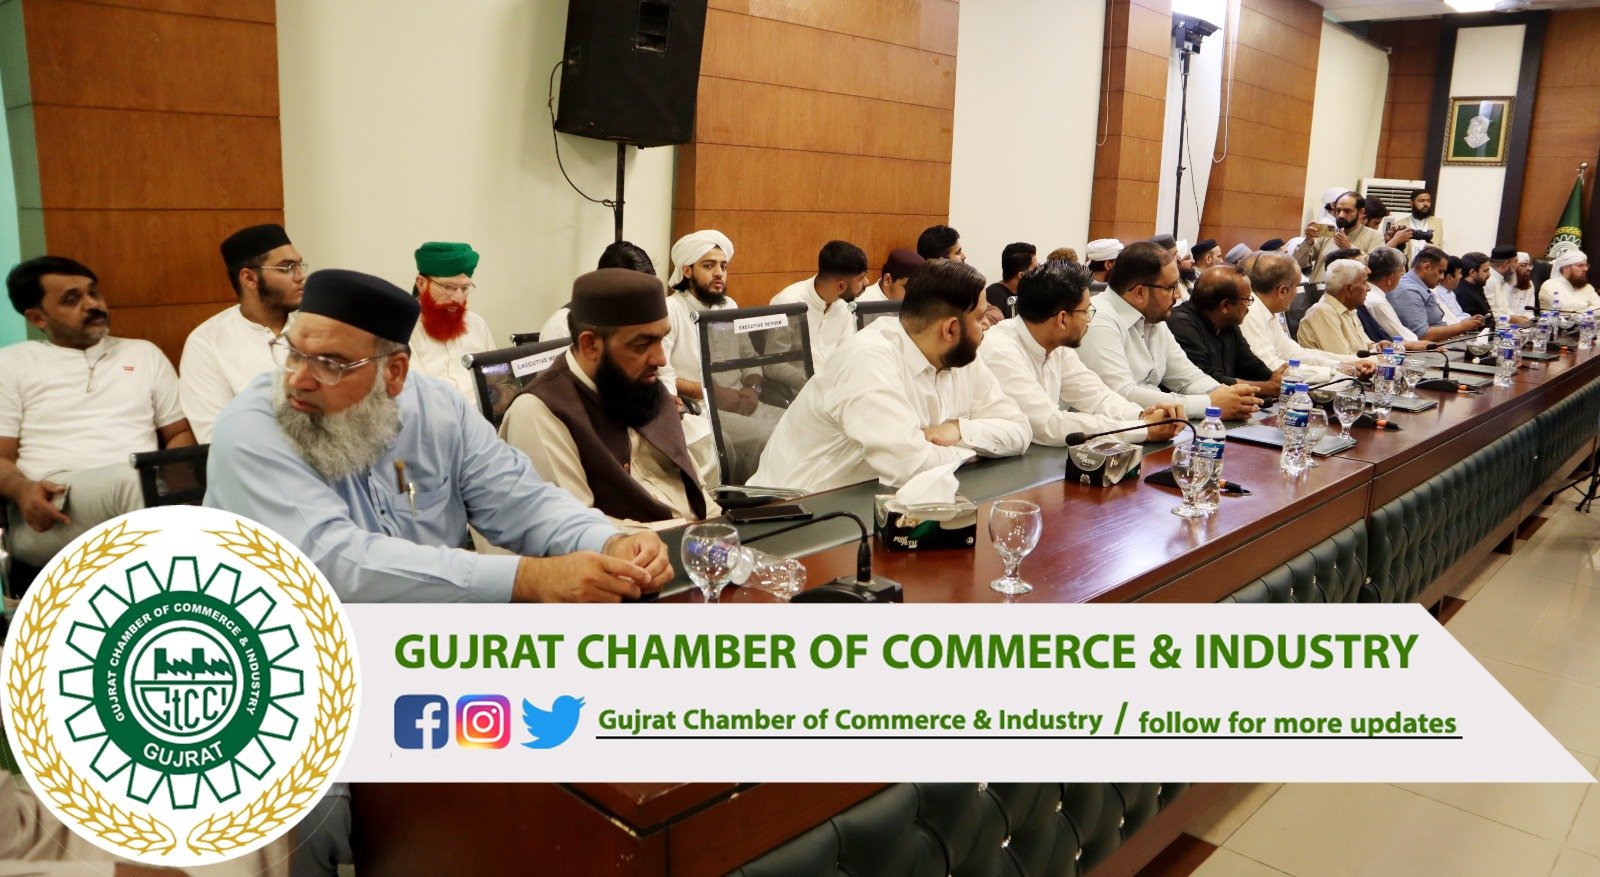 Gujrat Chamber of Commerce & Industryhosted an enlightening Islamic lecture, where Haji Imran AttariNigran-e-Majlis-e-Shura DawateIslami elaborated on the qualities of a good father and the principles of conducting business according to Islamic teachings.